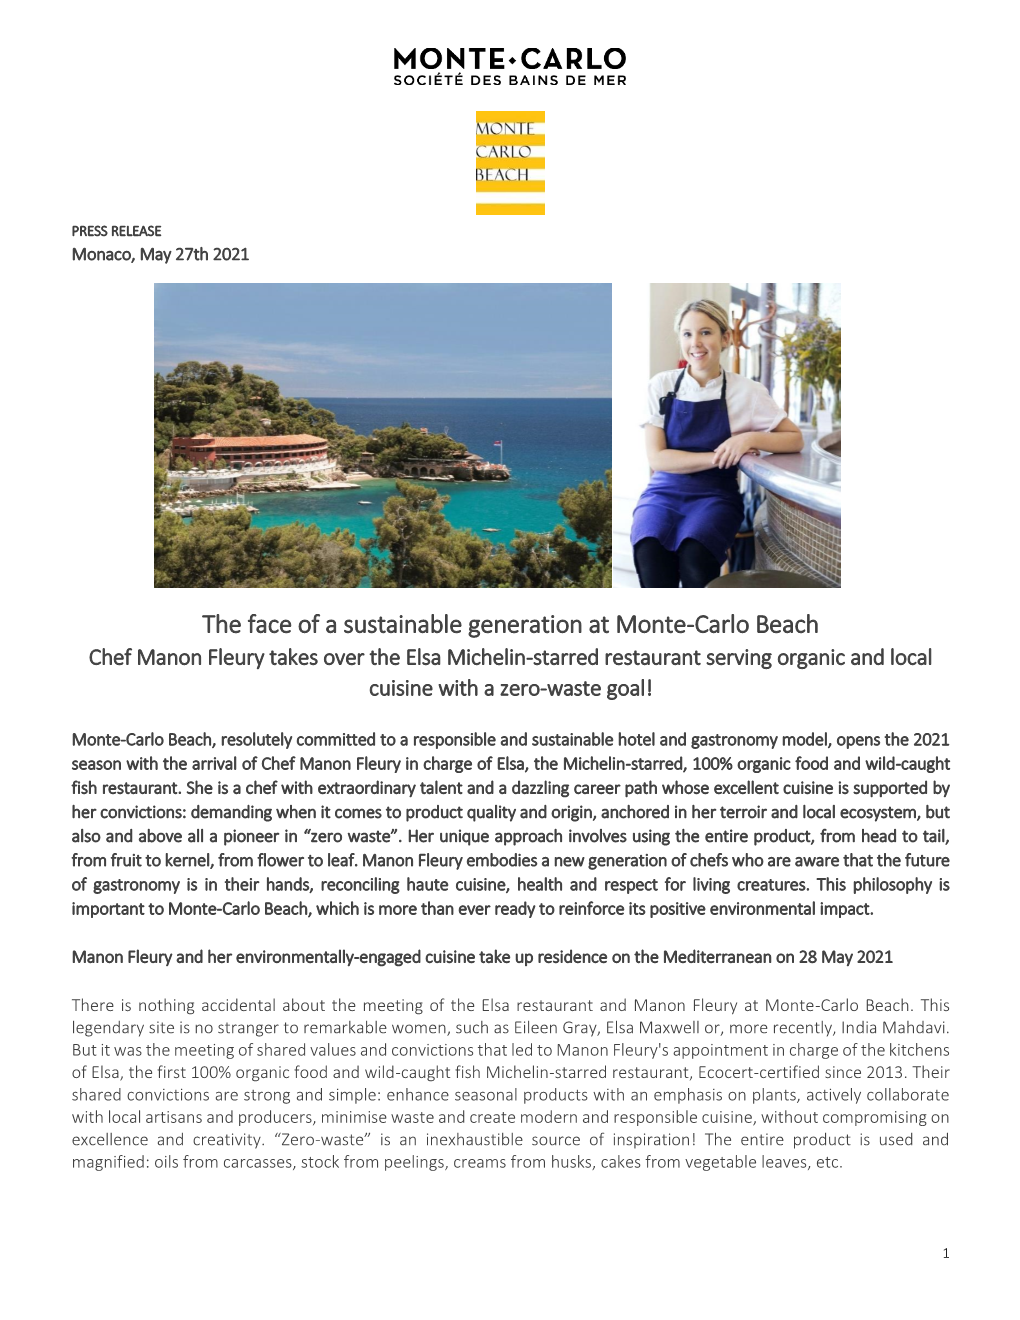 The Face of a Sustainable Generation at Monte-Carlo Beach